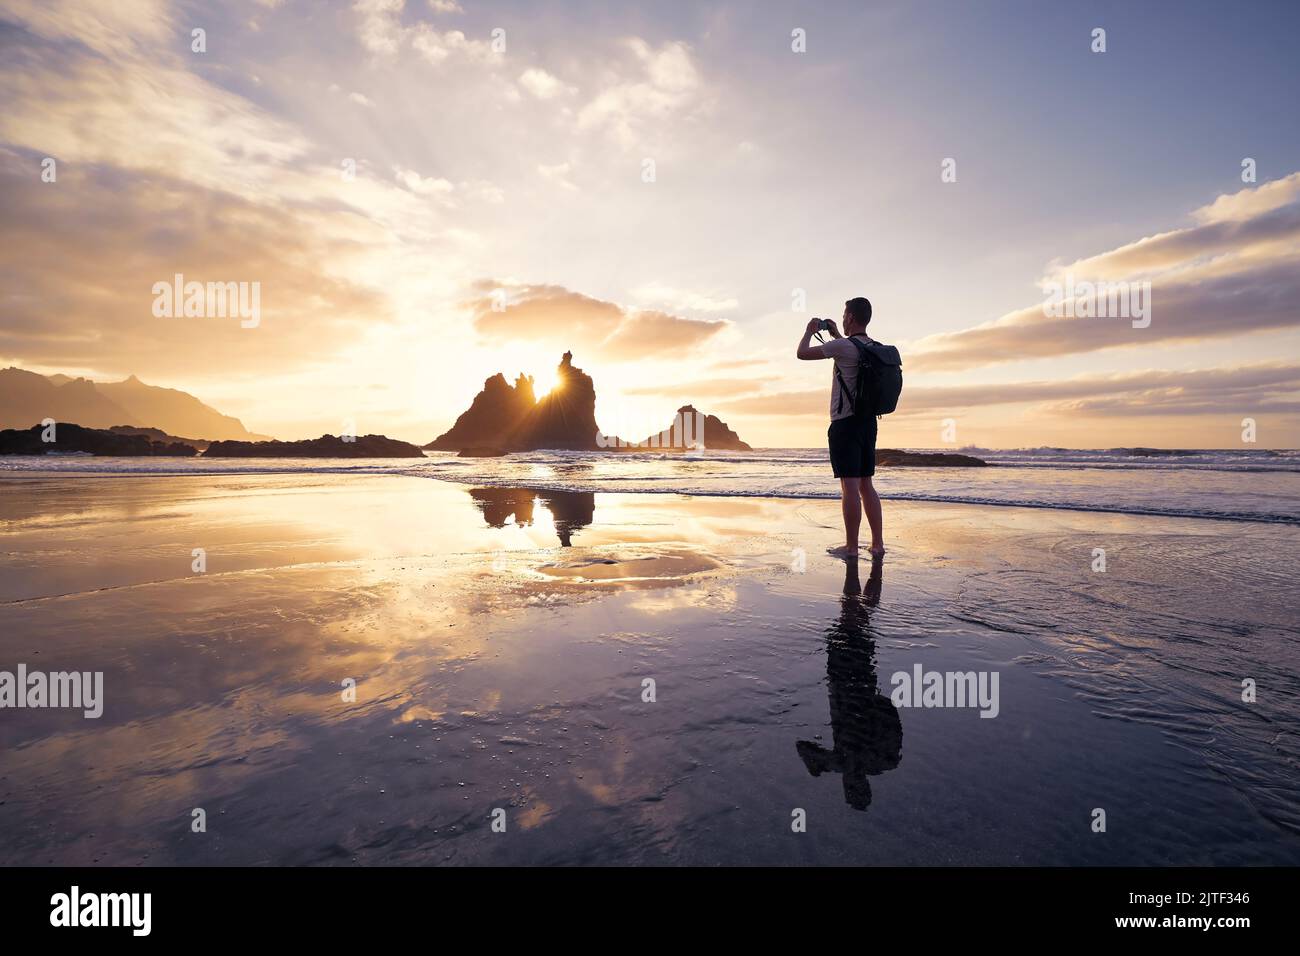 Man during photographing landscape with cliff. Photographer on beach at beautiful sunset. Tenerife, Canary Islands, Spain. Stock Photo